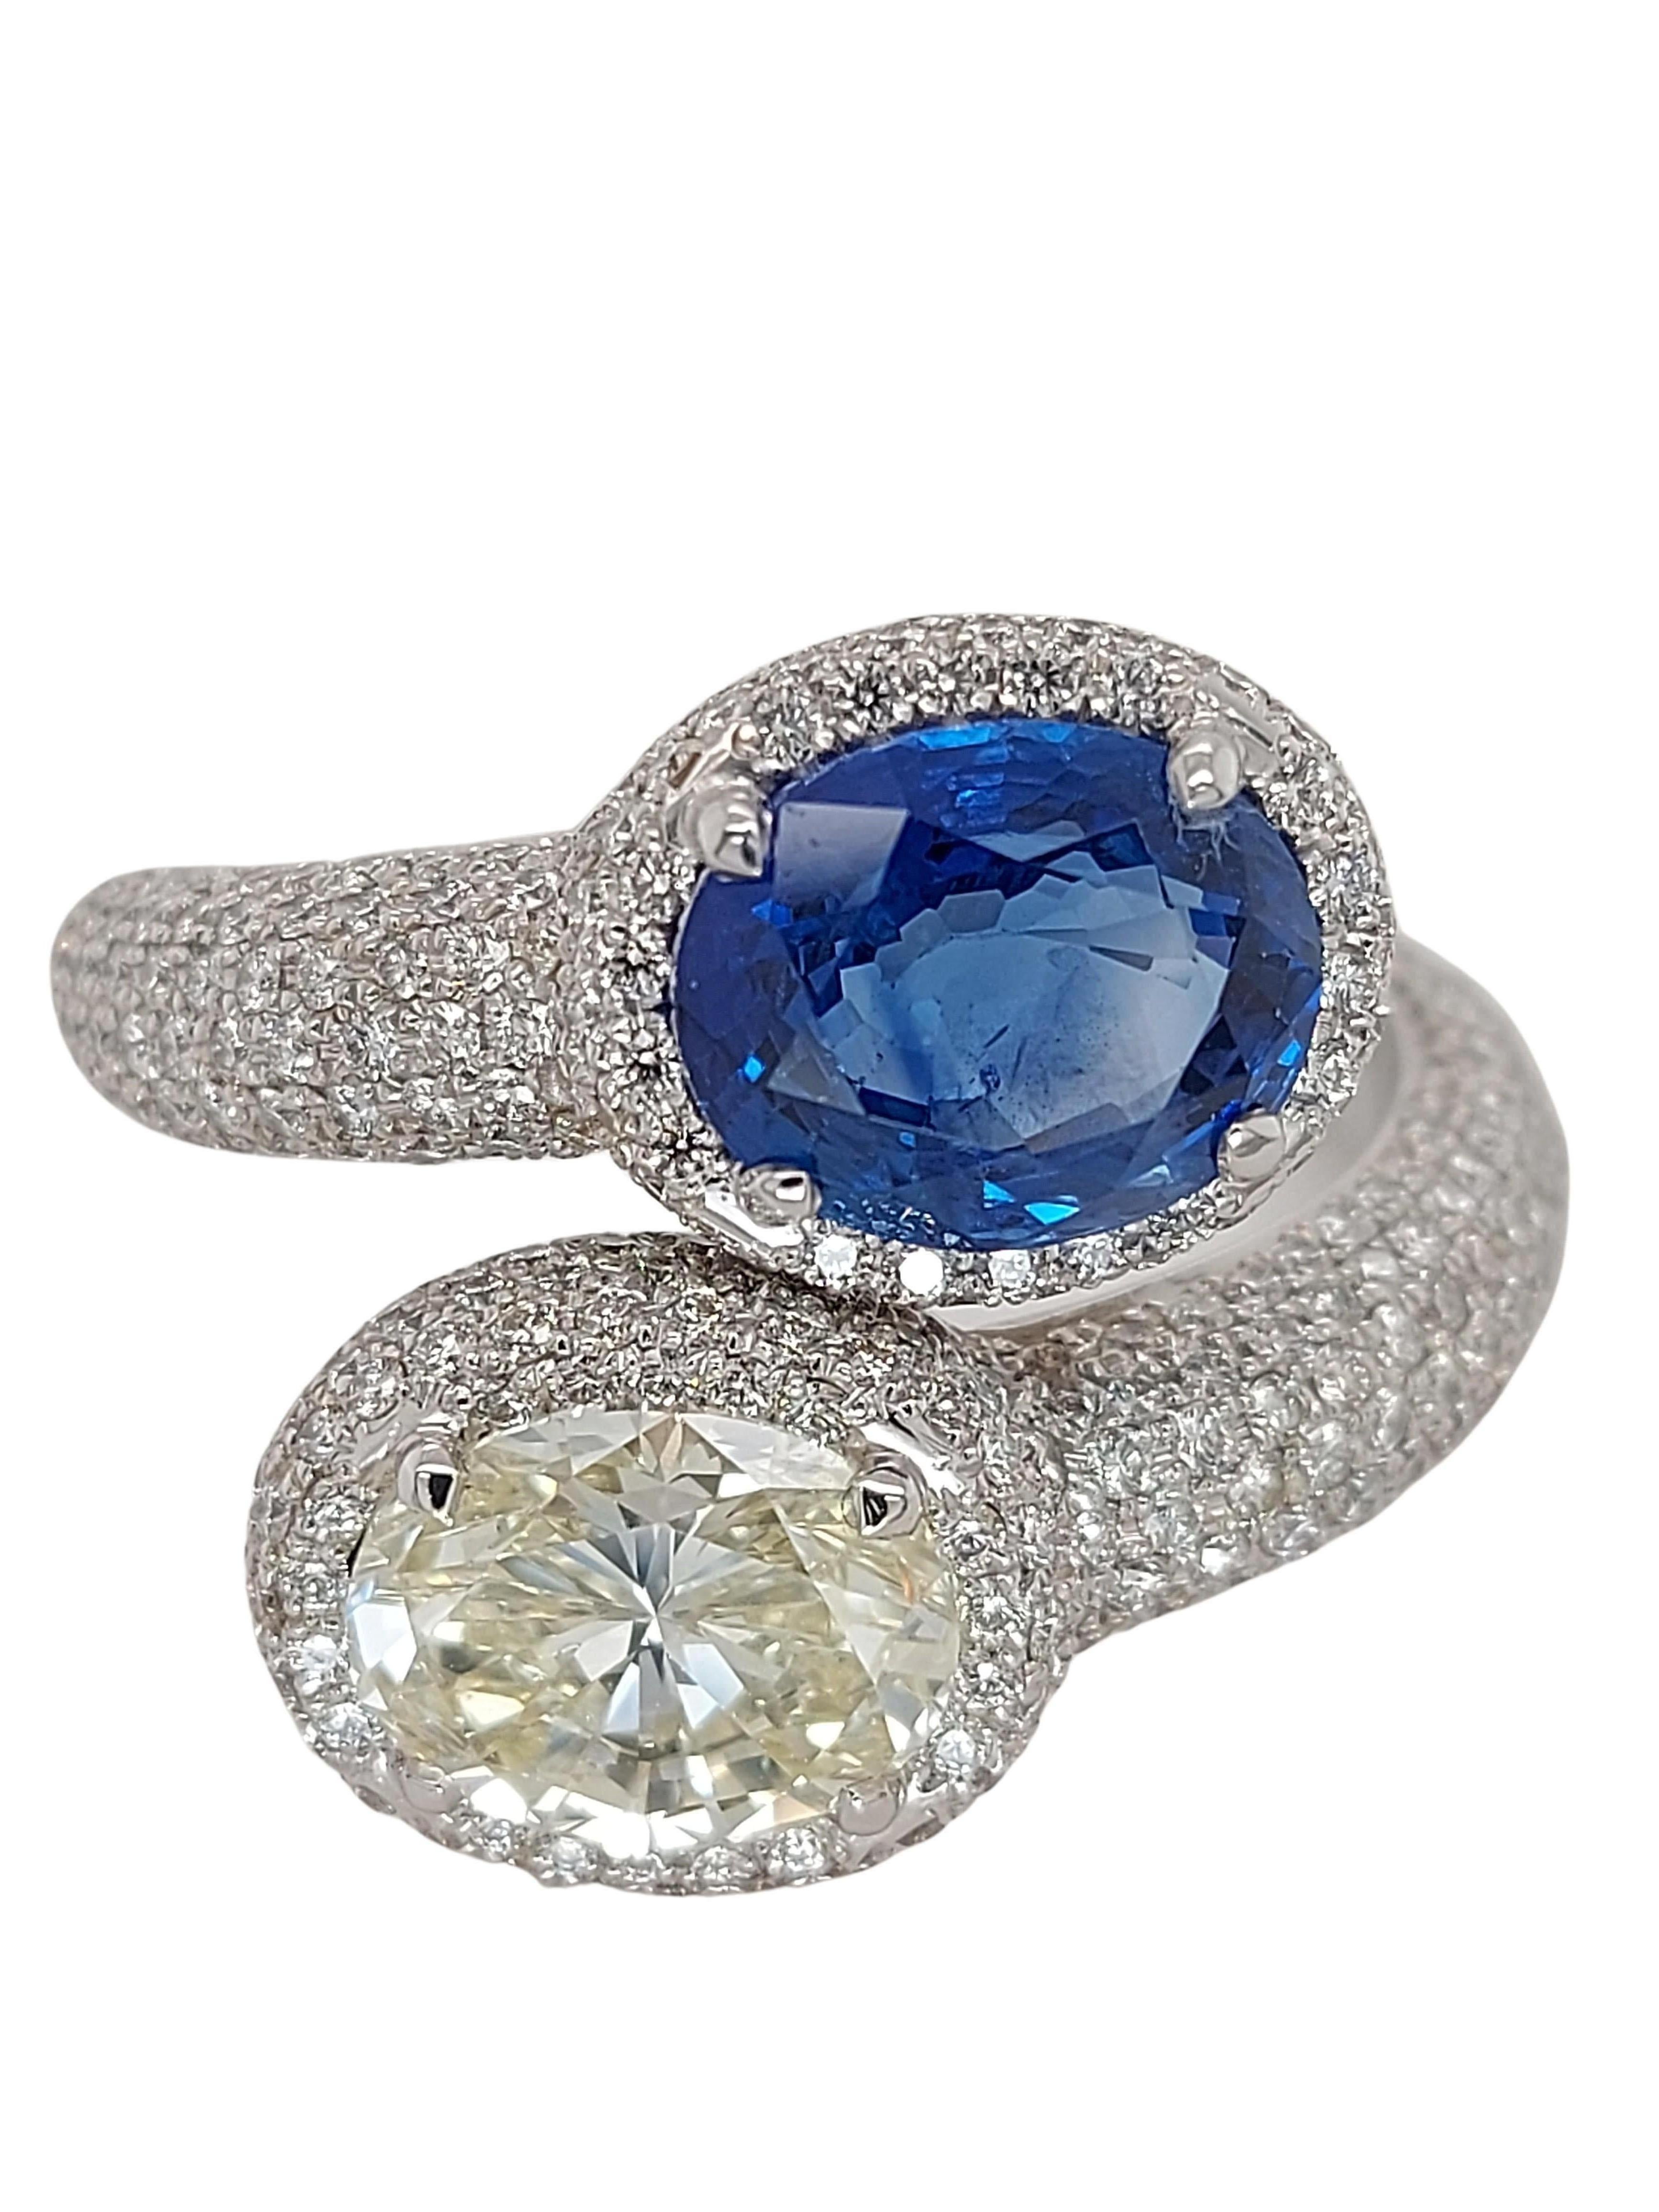 Modern Stunning Toi et Moi 18kt White Gold Ring with a 2.63 Carat Sapphire, 1.67 Carat  For Sale